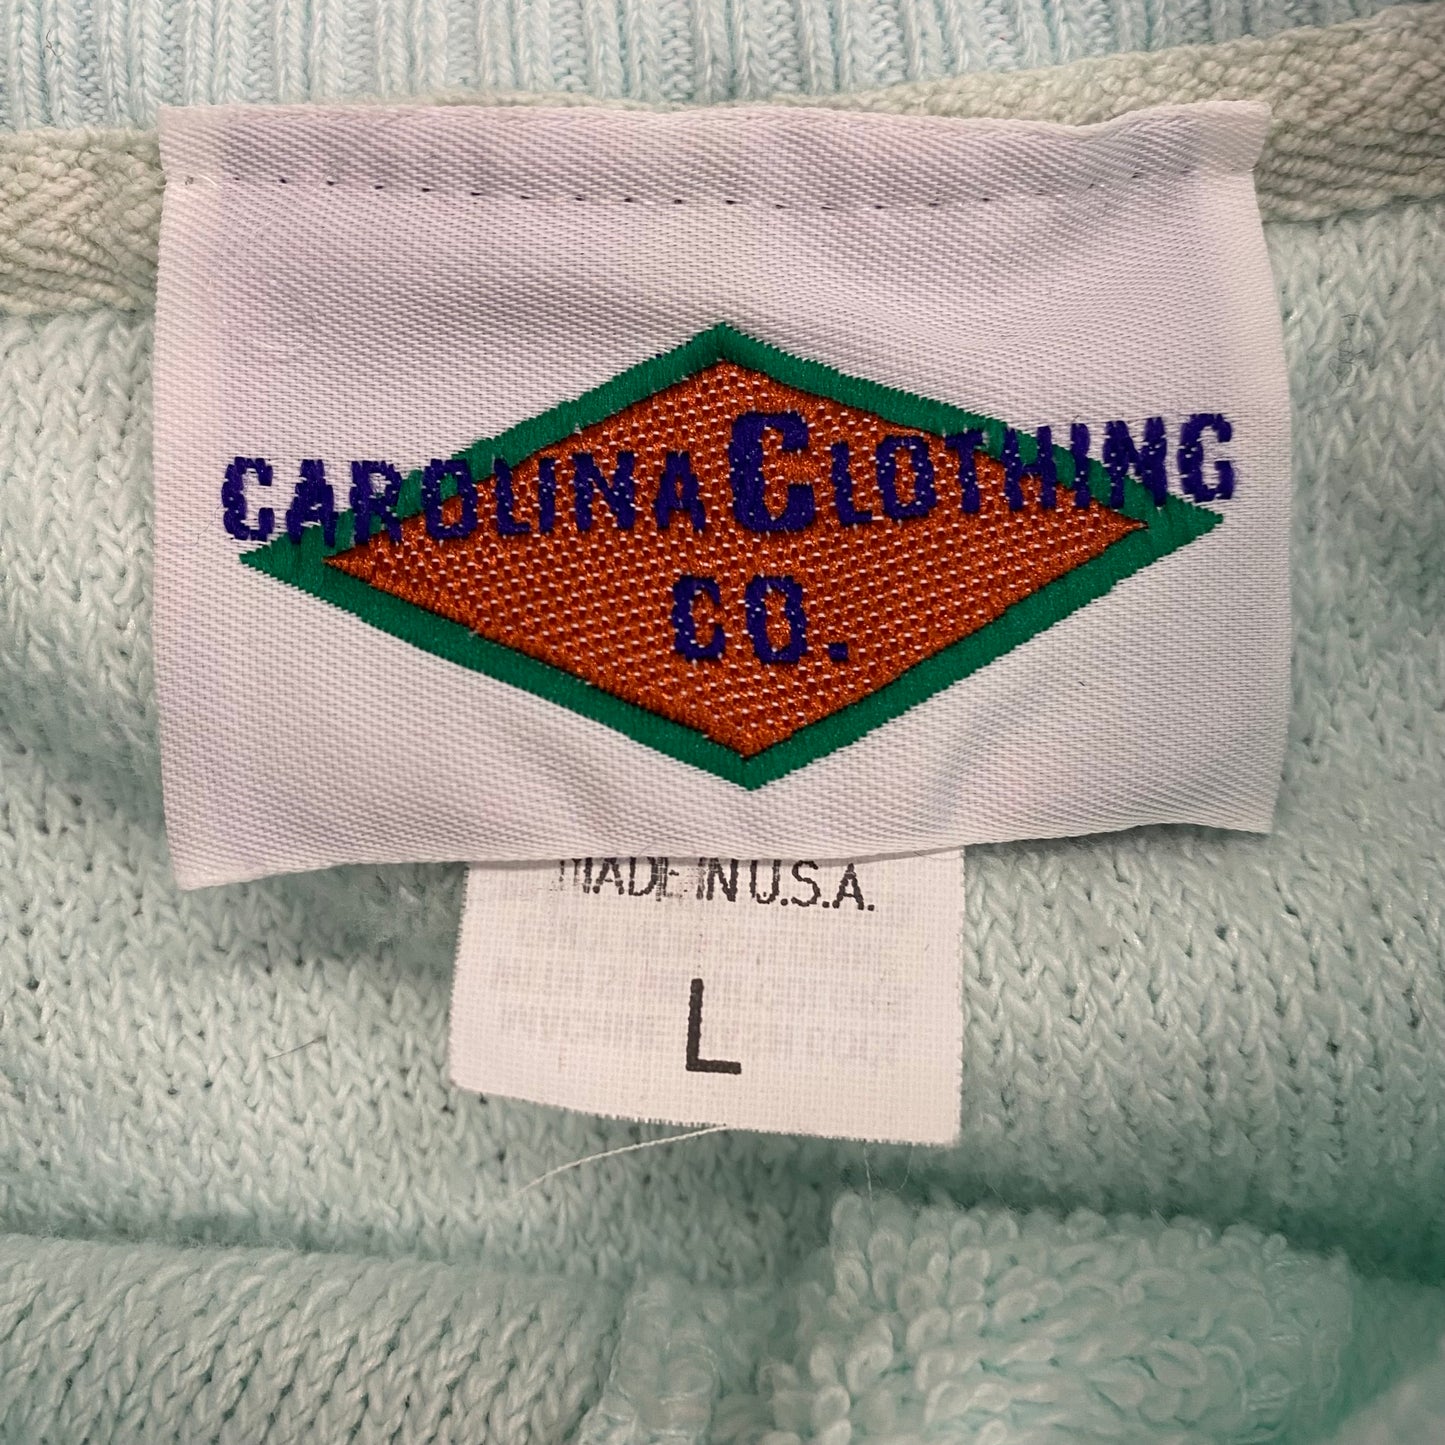 Vintage 1980s Carolina Clothing Co. Terry Cotton Cropped Button Up - Size Large